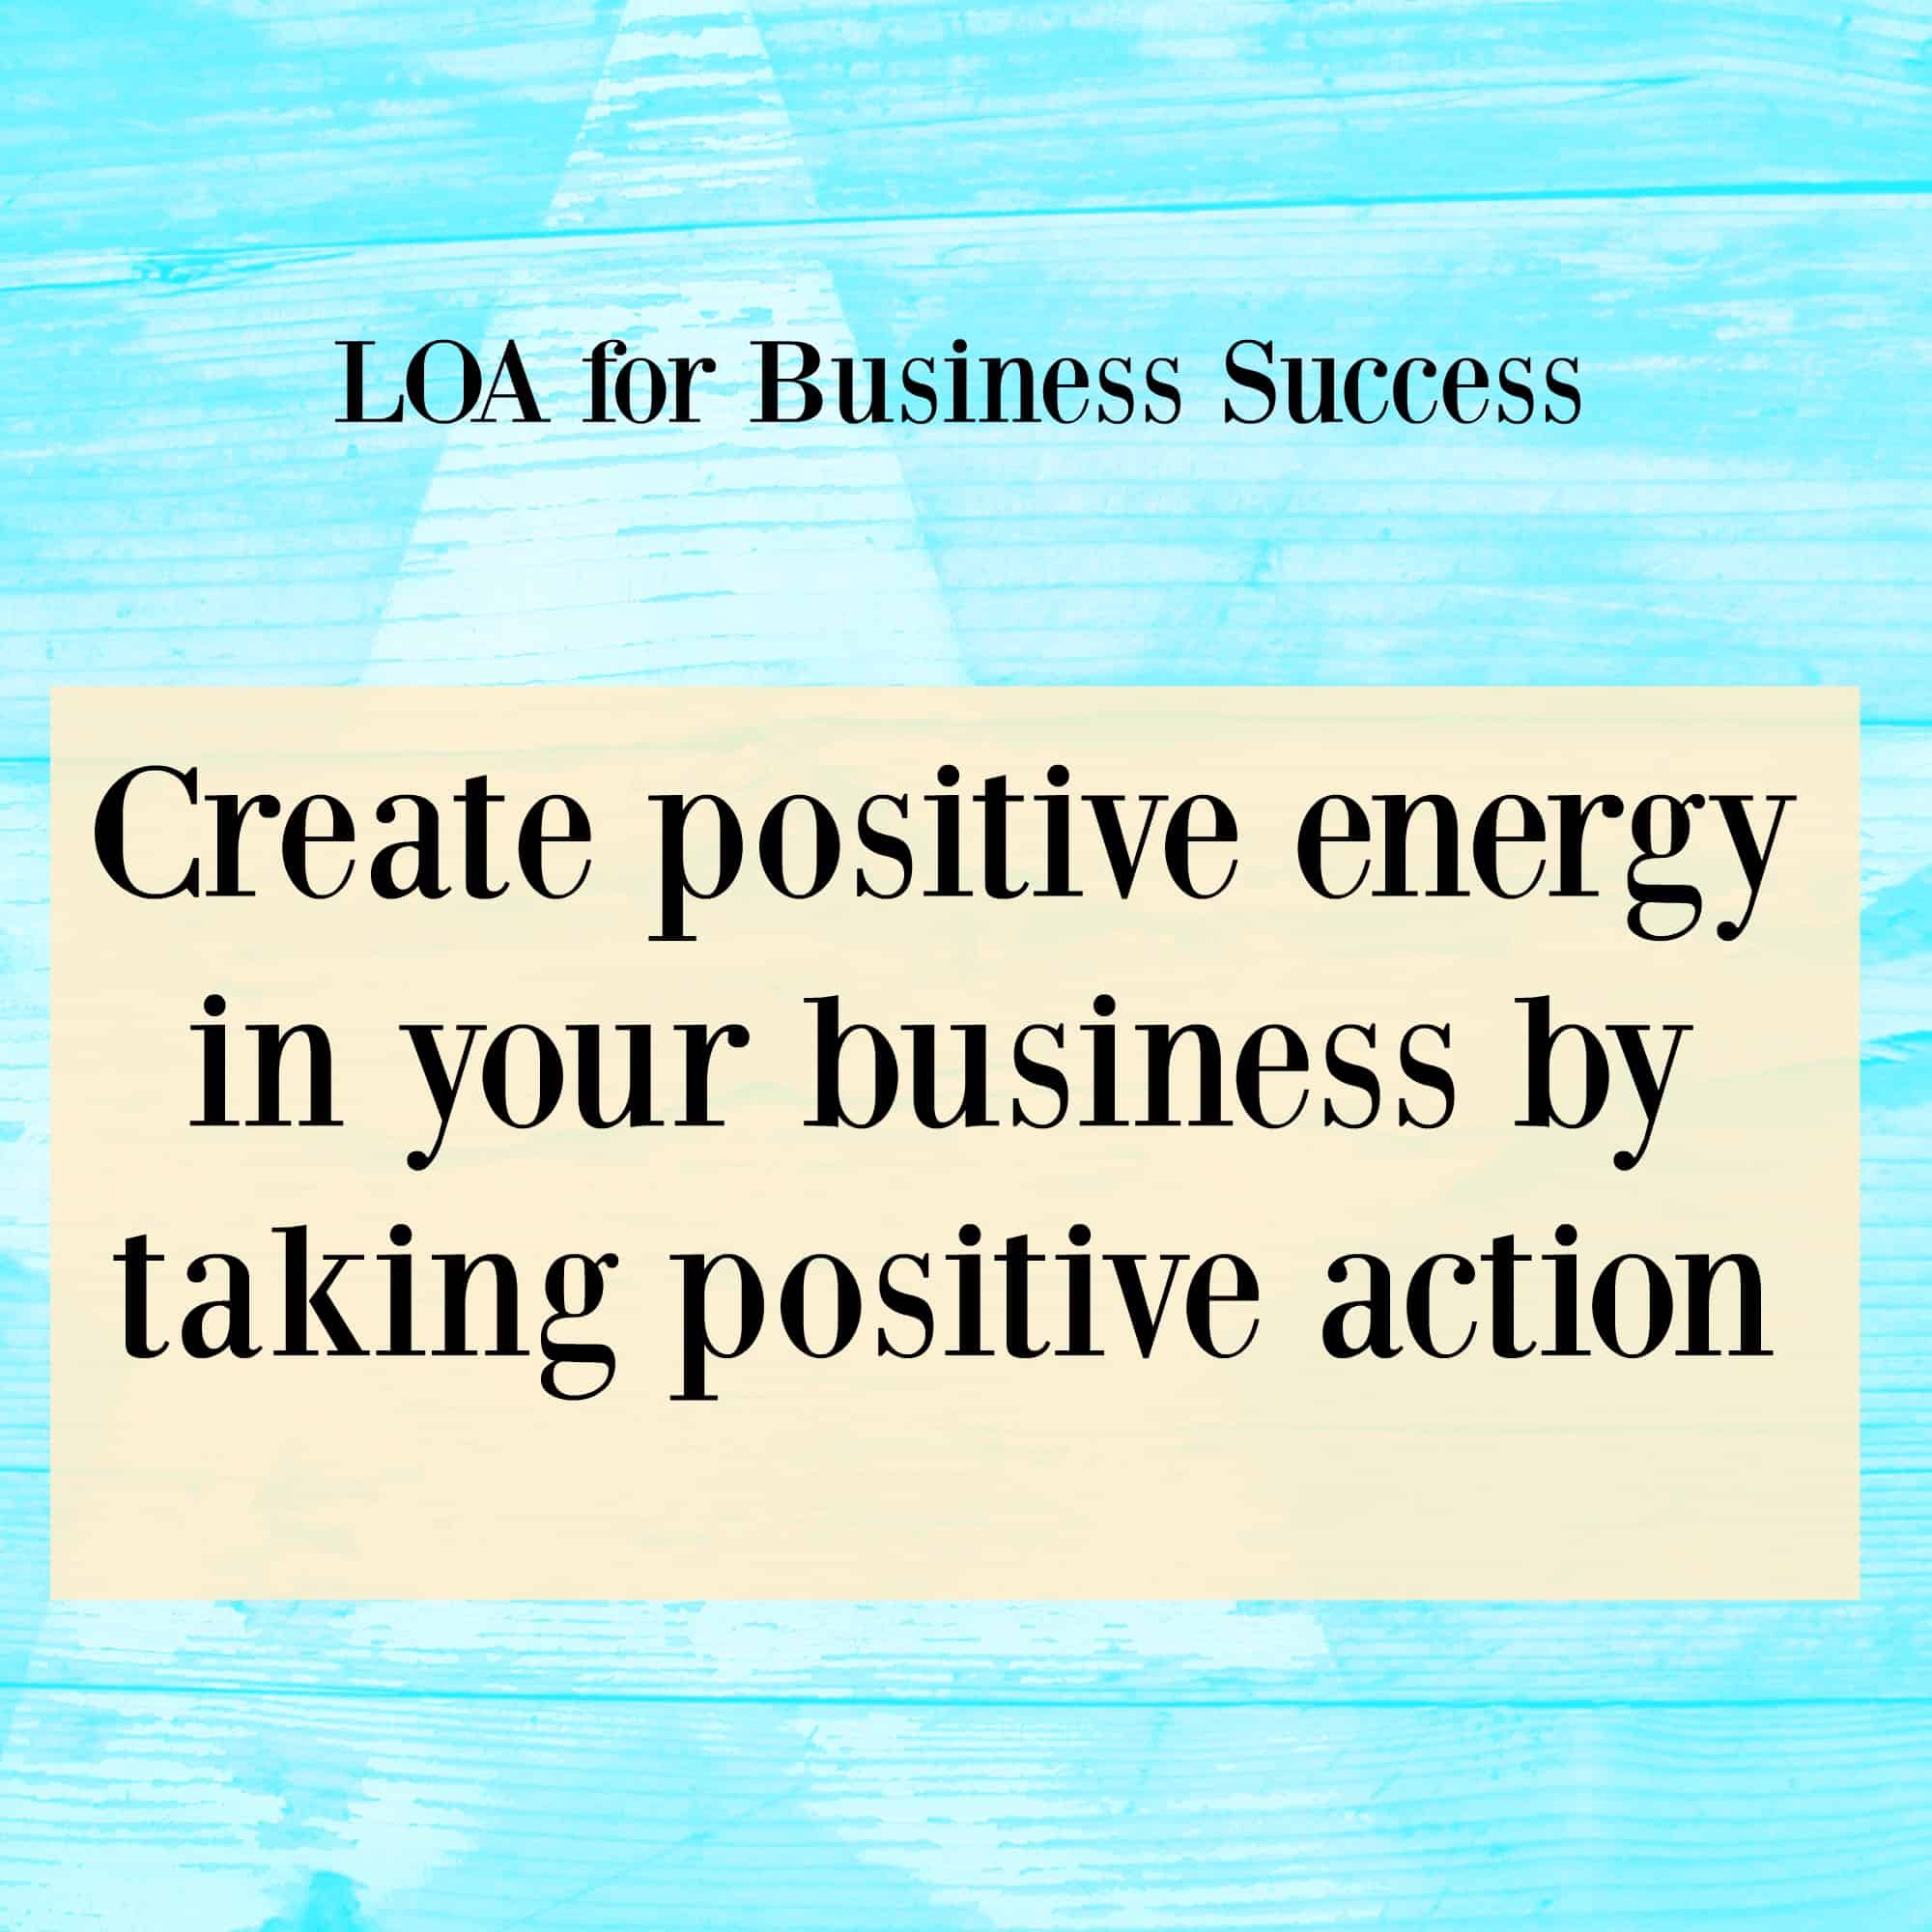 Law of attraction for business success - Create positive energy in your business by taking positive action. Click through for why I feel this is so important.